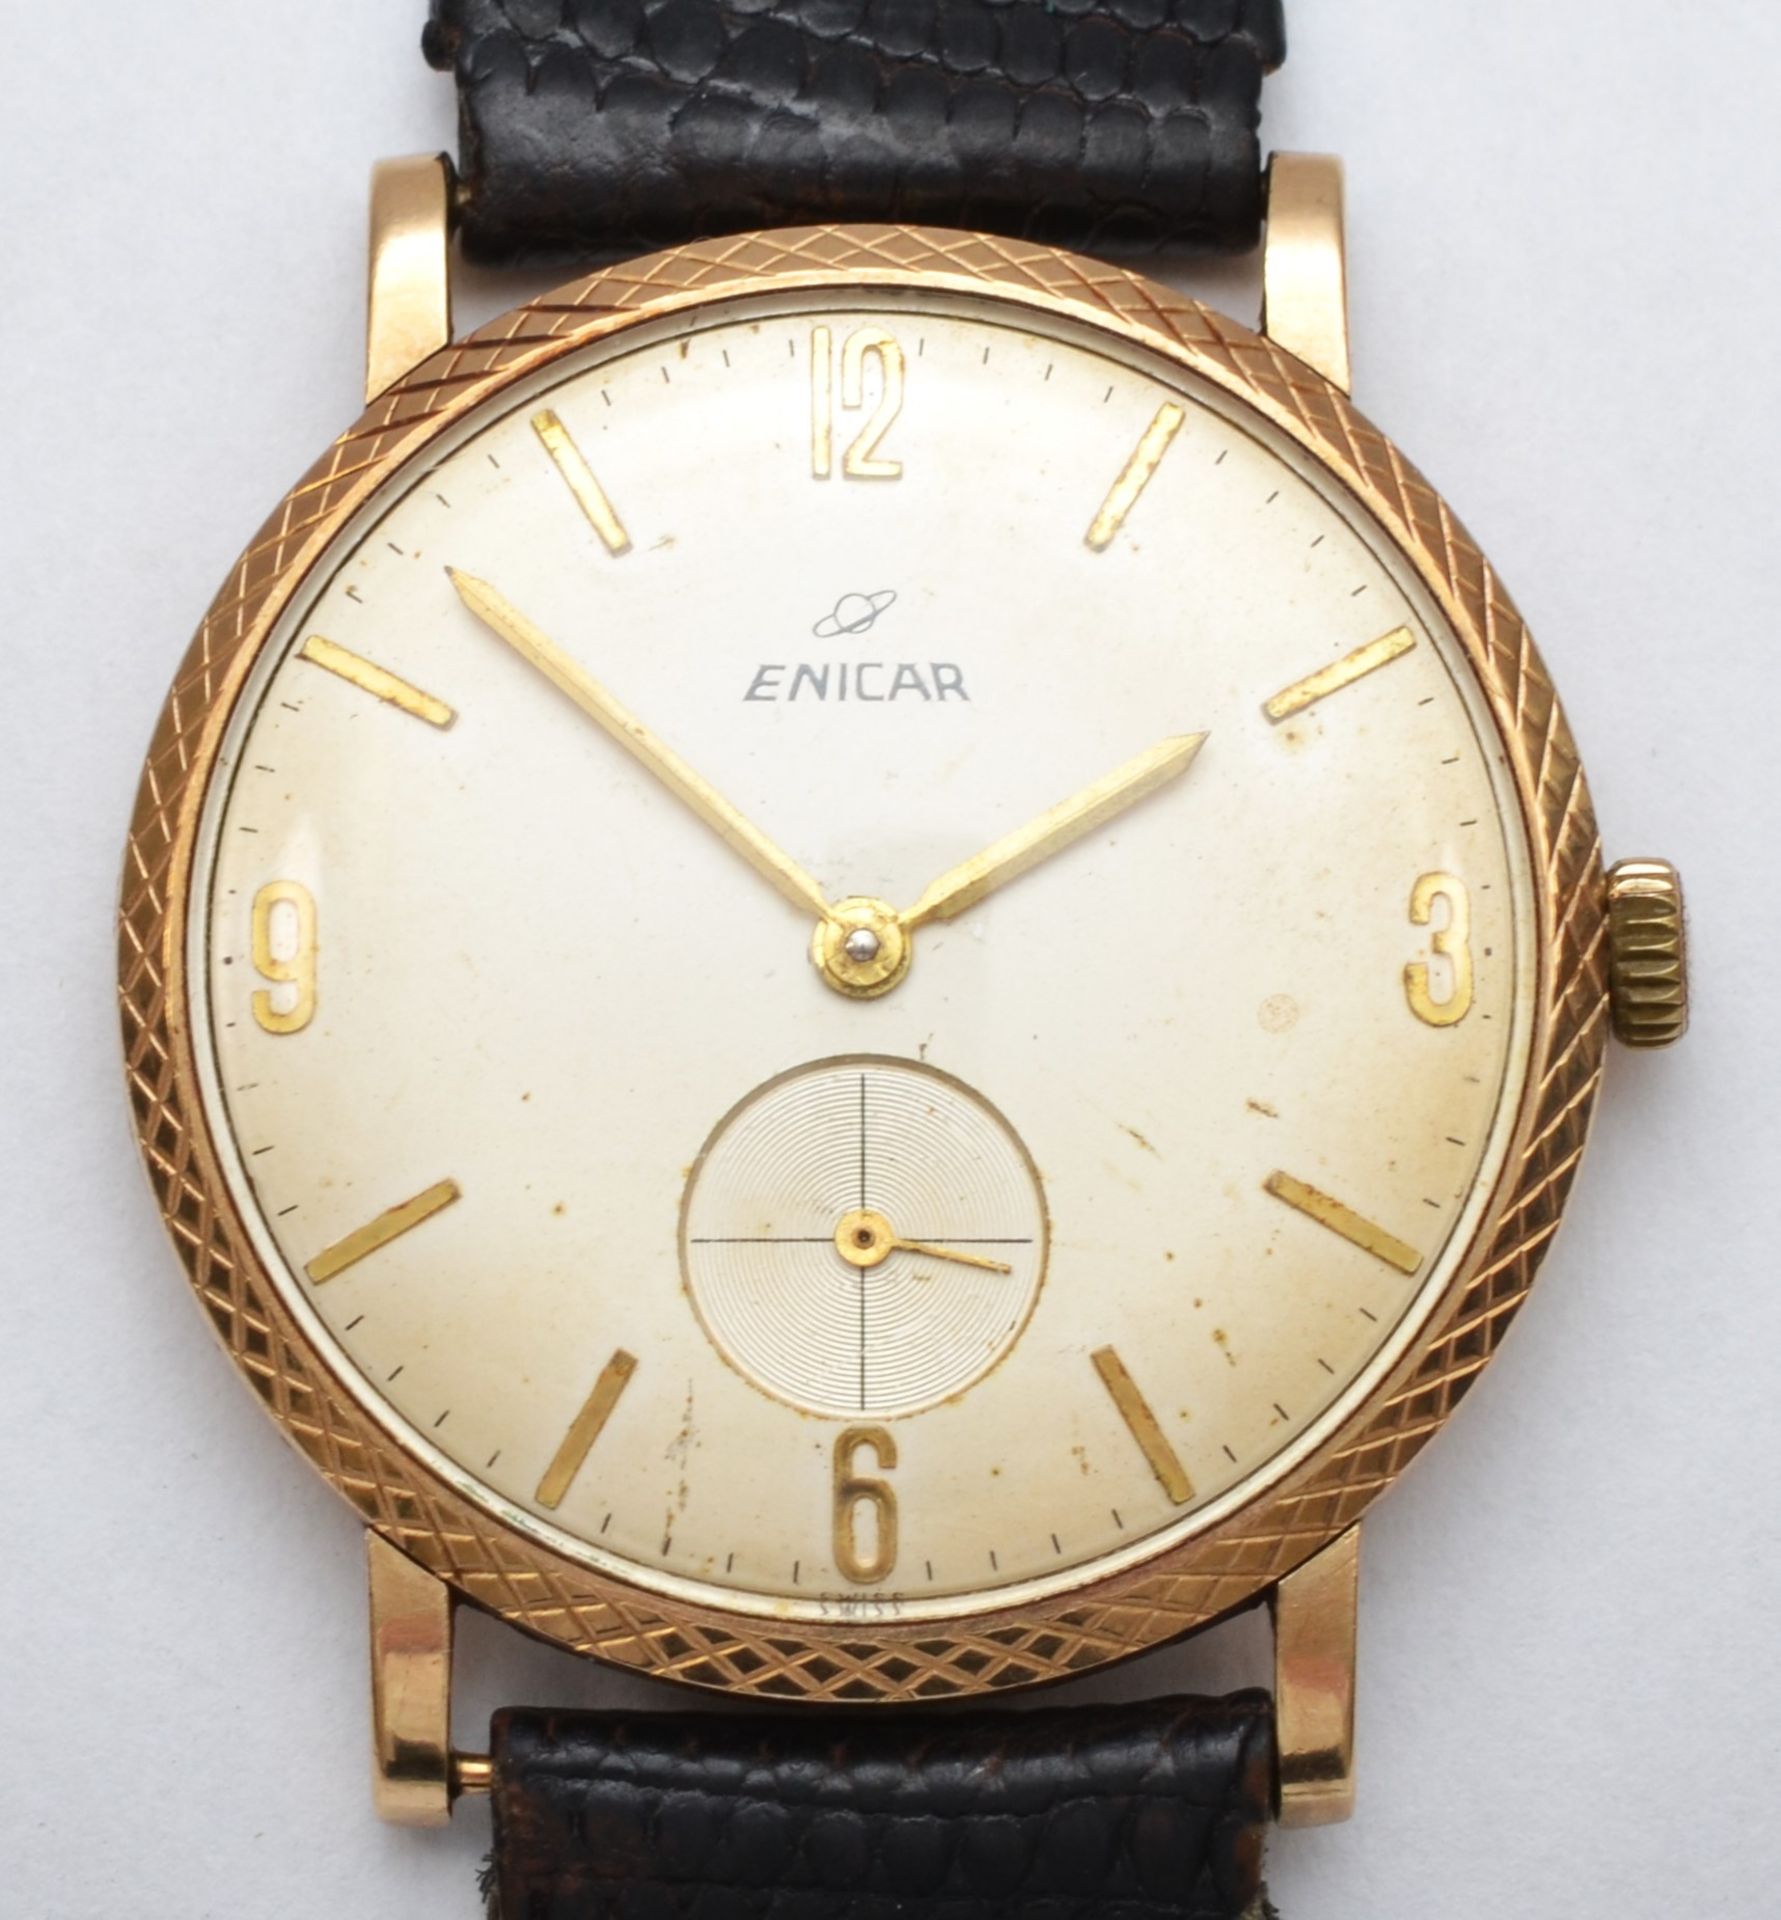 A 9ct gold gents Enicar wrist watch c1960s, having manual wind jewelled movement with black